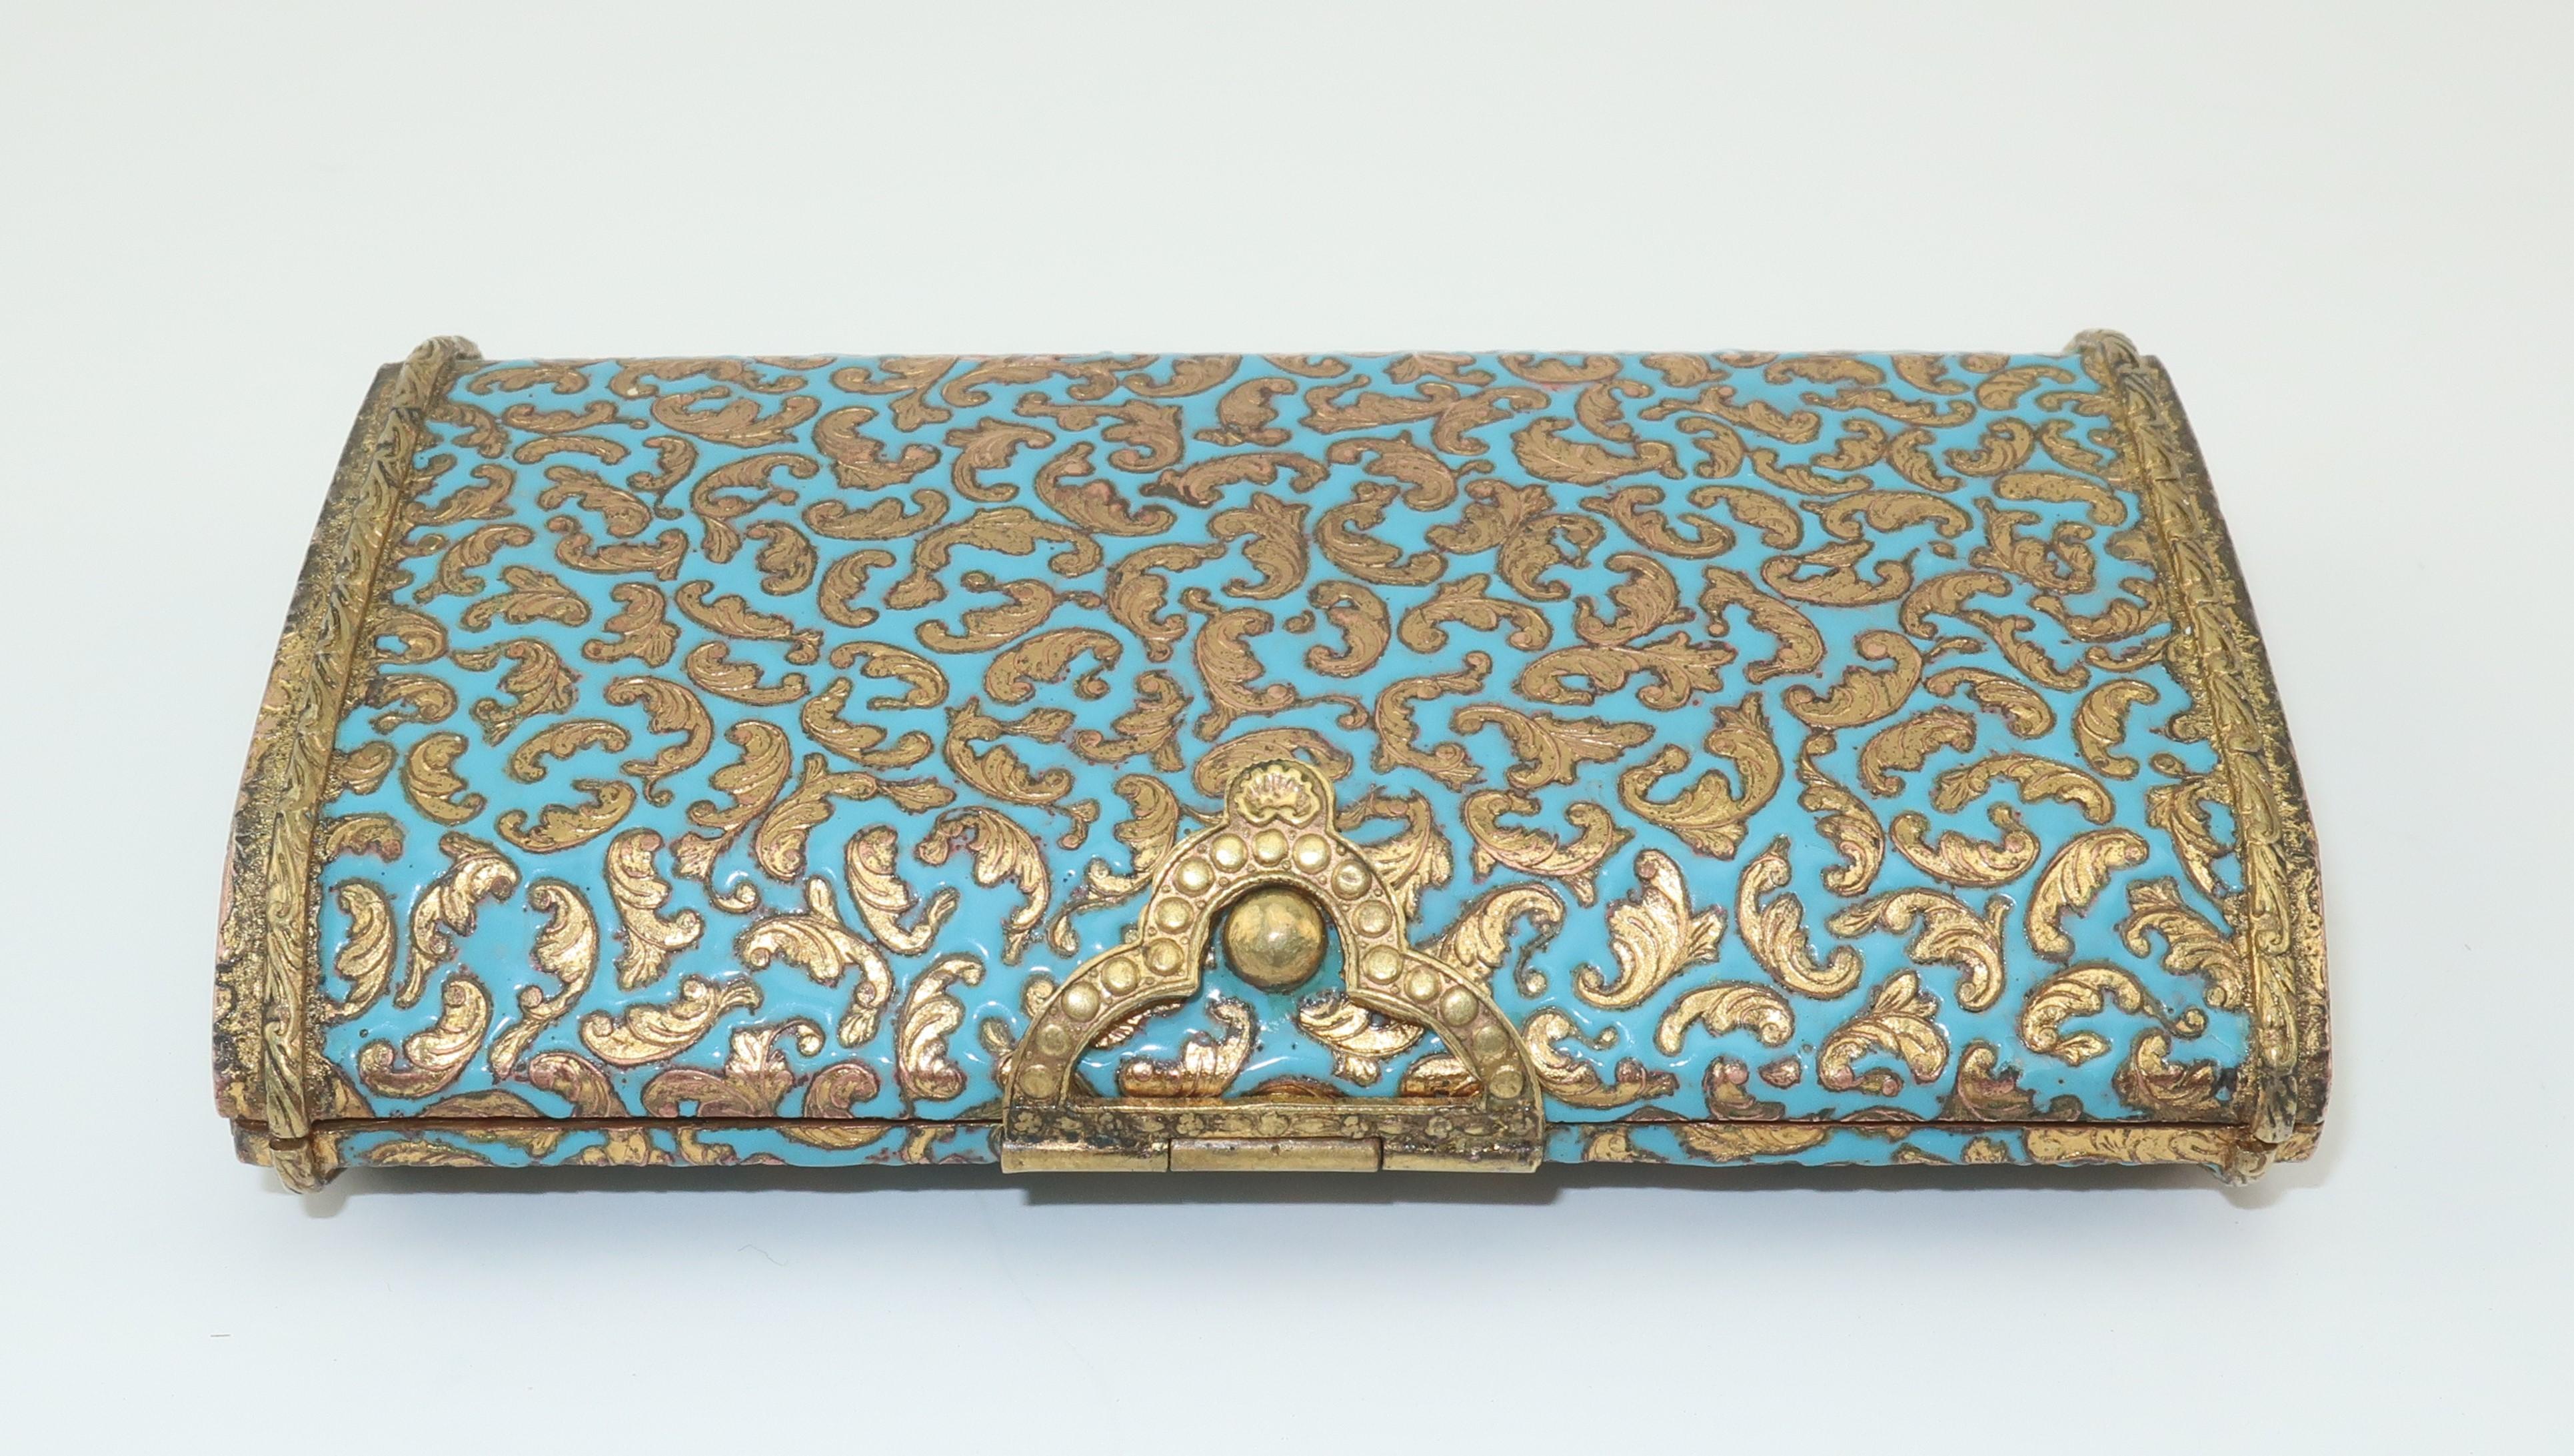 Beautiful early 1900's Italian gilt metal cigarette case with intricate details and a turquoise enamel decoration similar in style to cloisonne.  The case features a nob closure with a spring loaded hinge for easy one handed access to filterless